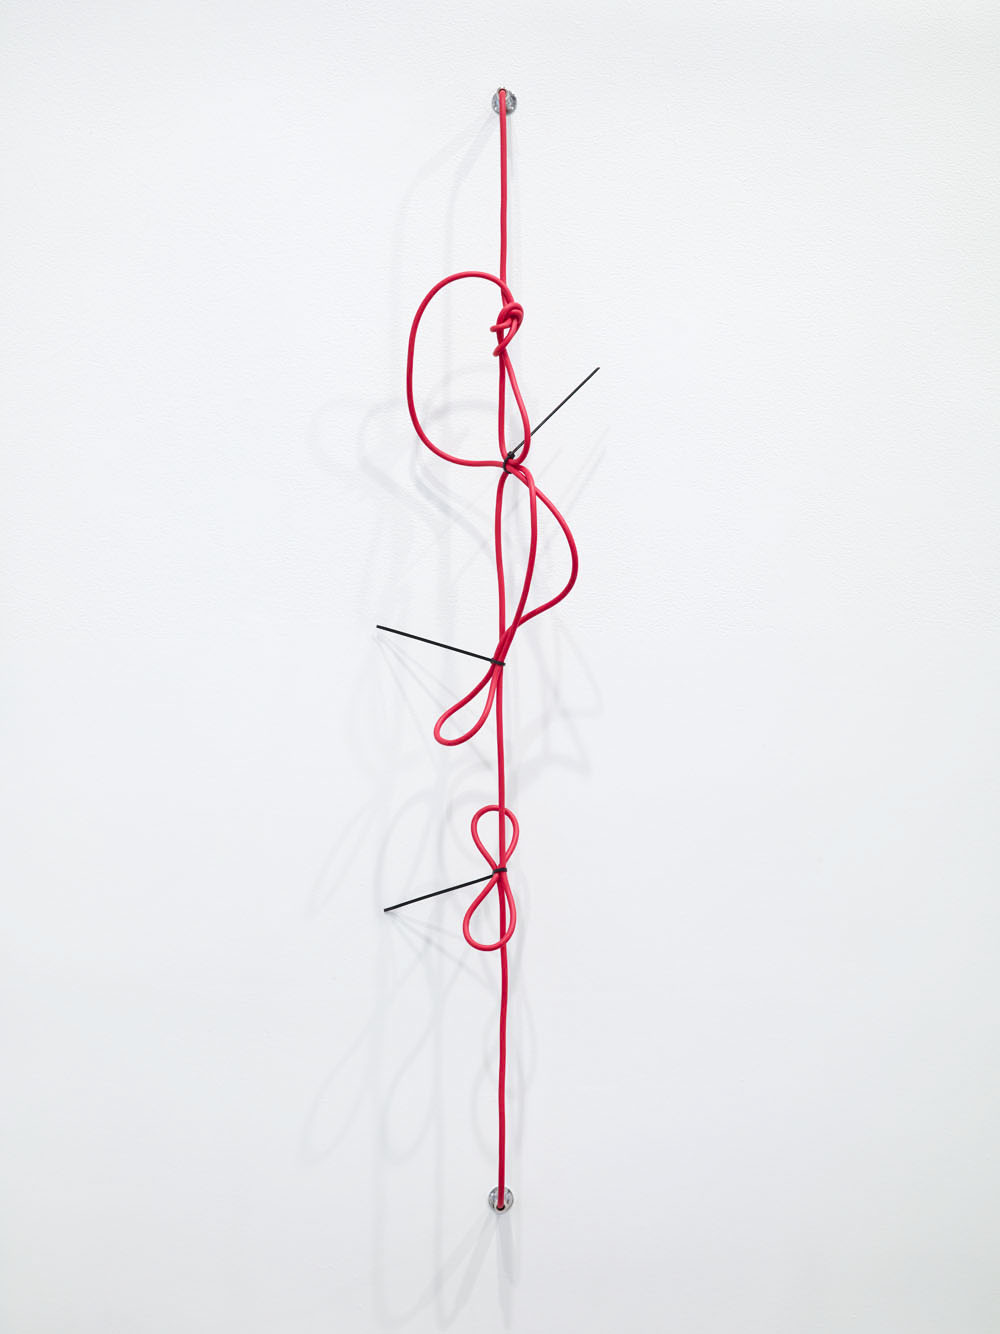  SHHH, The Red Series #2,&nbsp;Noise cancelling instrument cable, cable ties and endpin jacks 44 x 9 x 4.75 inches 2014 